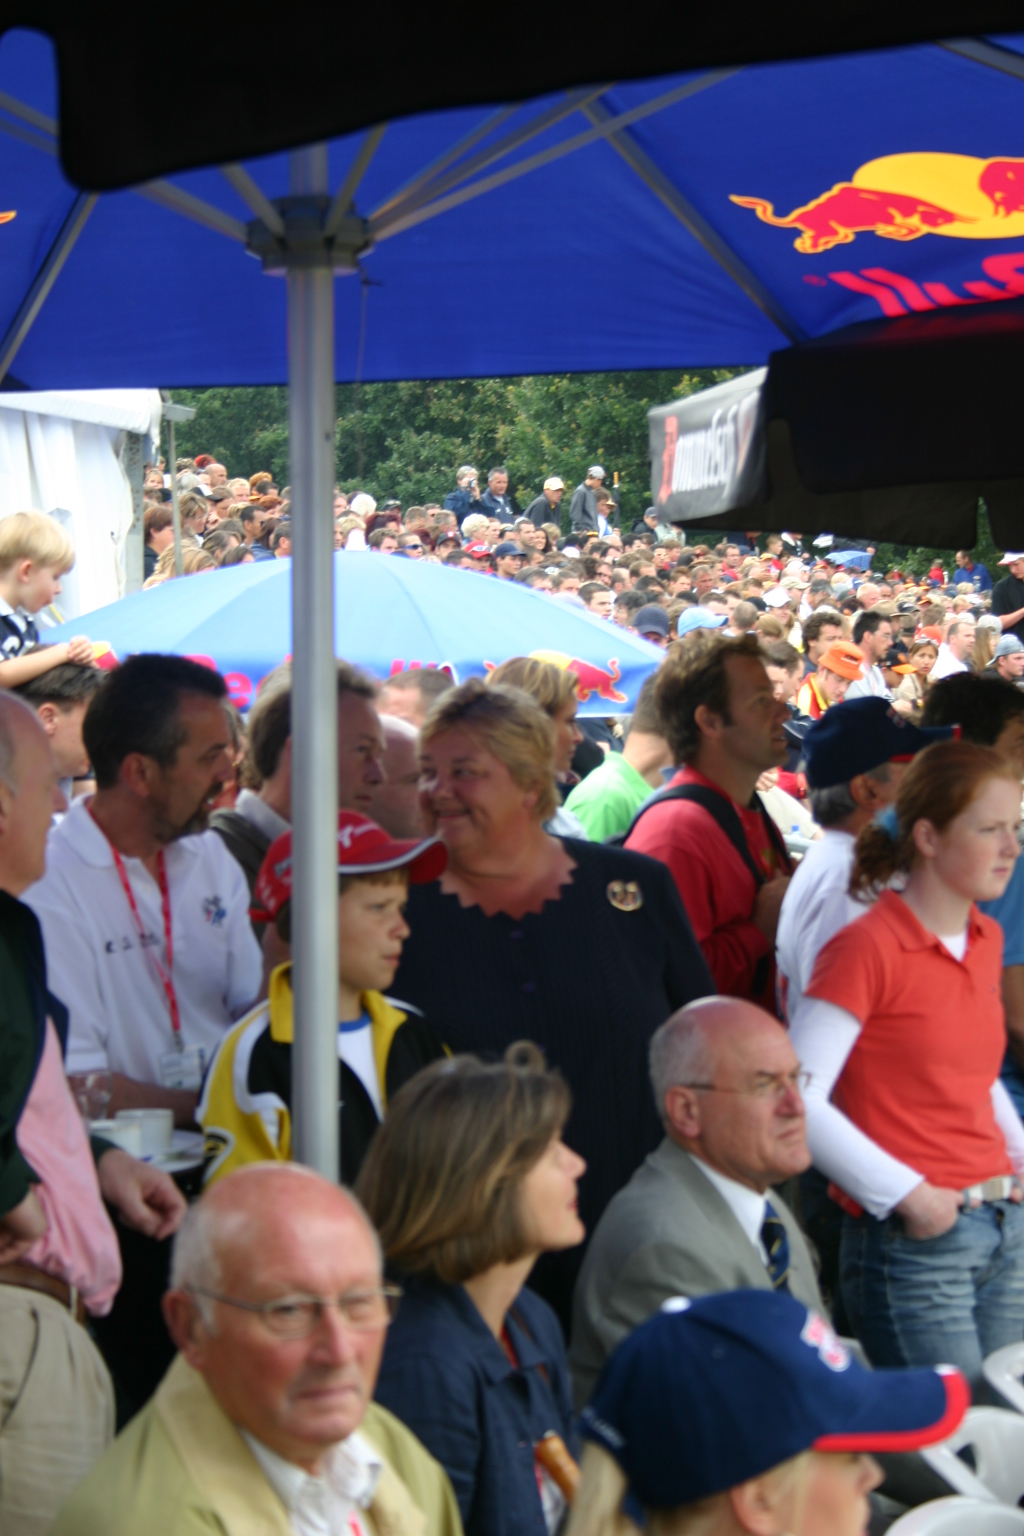 Mrs. ERica Terpstra, Chairman of the Dutch Olympic Committee, in the middle of the crowd 